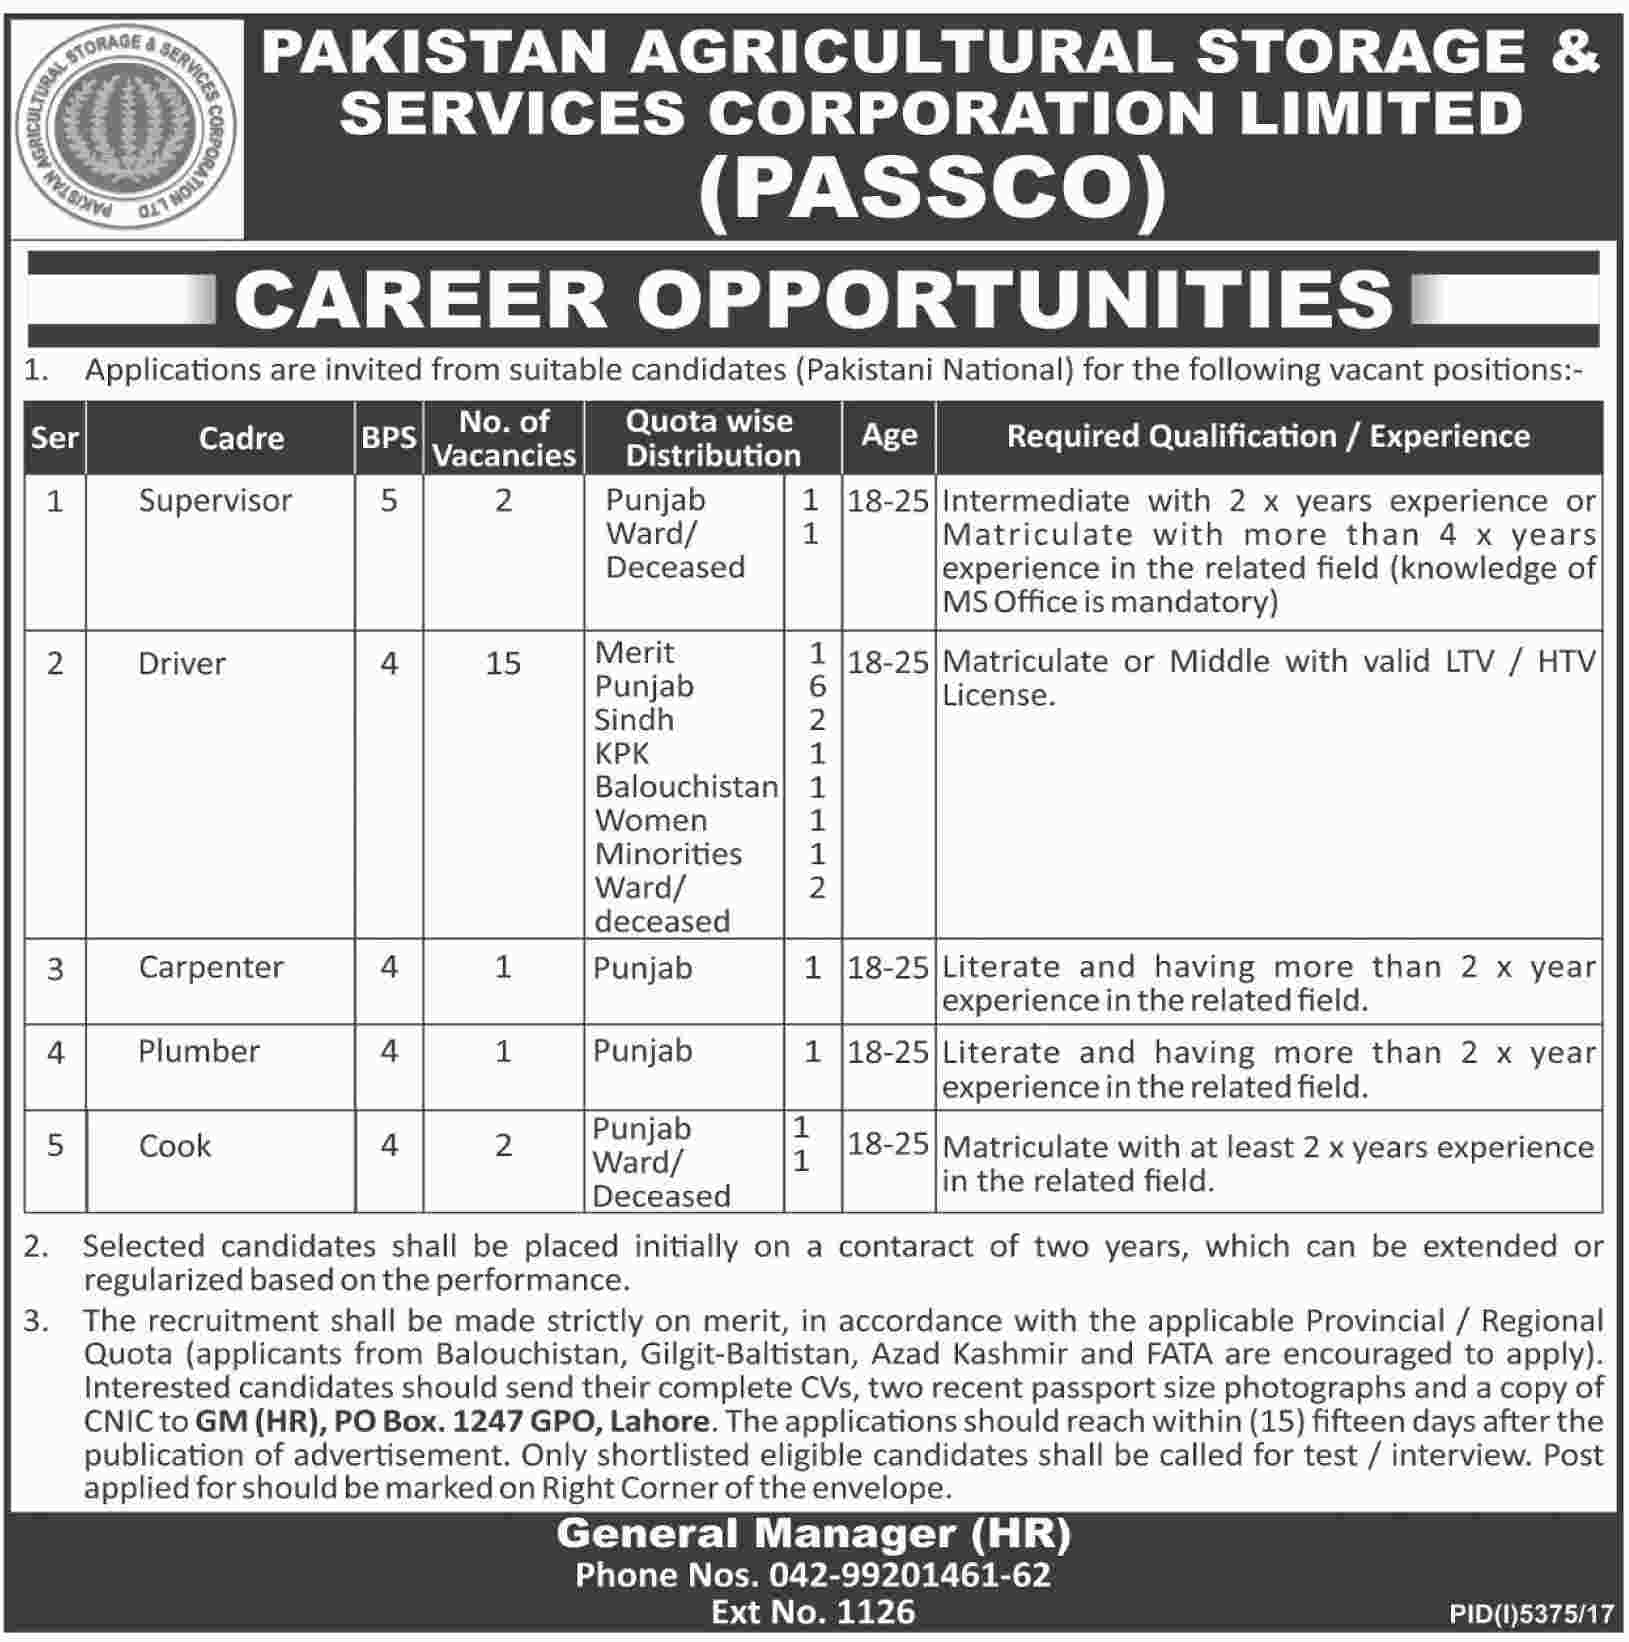 Jobs in Pakistan Agriculture Storage and Services Corporation Limited 01 April 2018